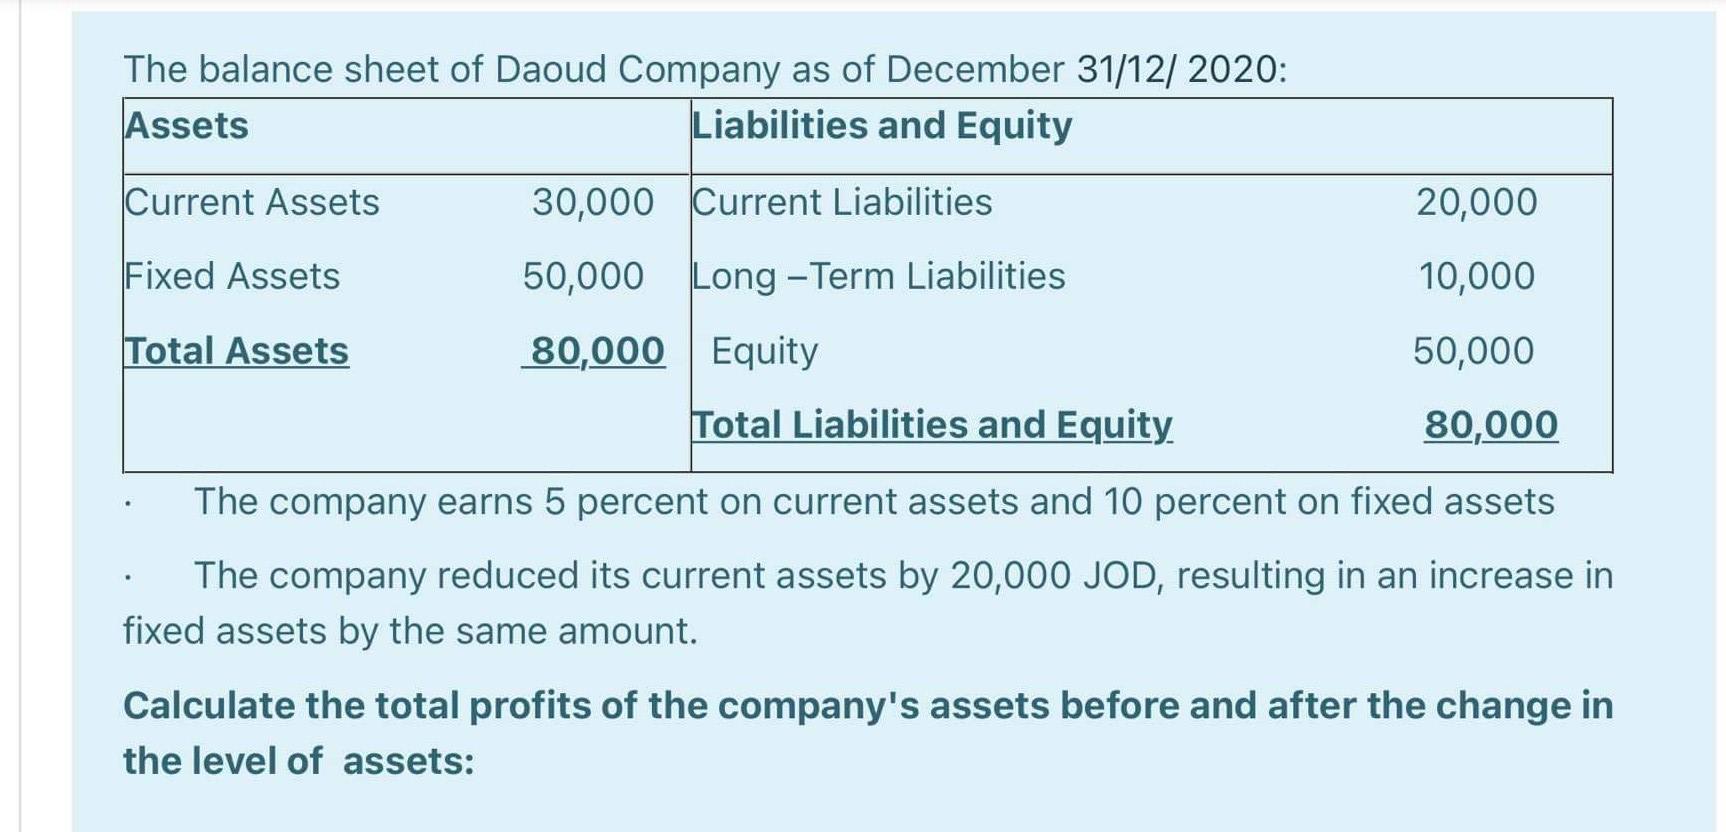 The balance sheet of Daoud Company as of December 31/12/2020: Assets Liabilities and Equity Current Assets 30,000 Current Lia